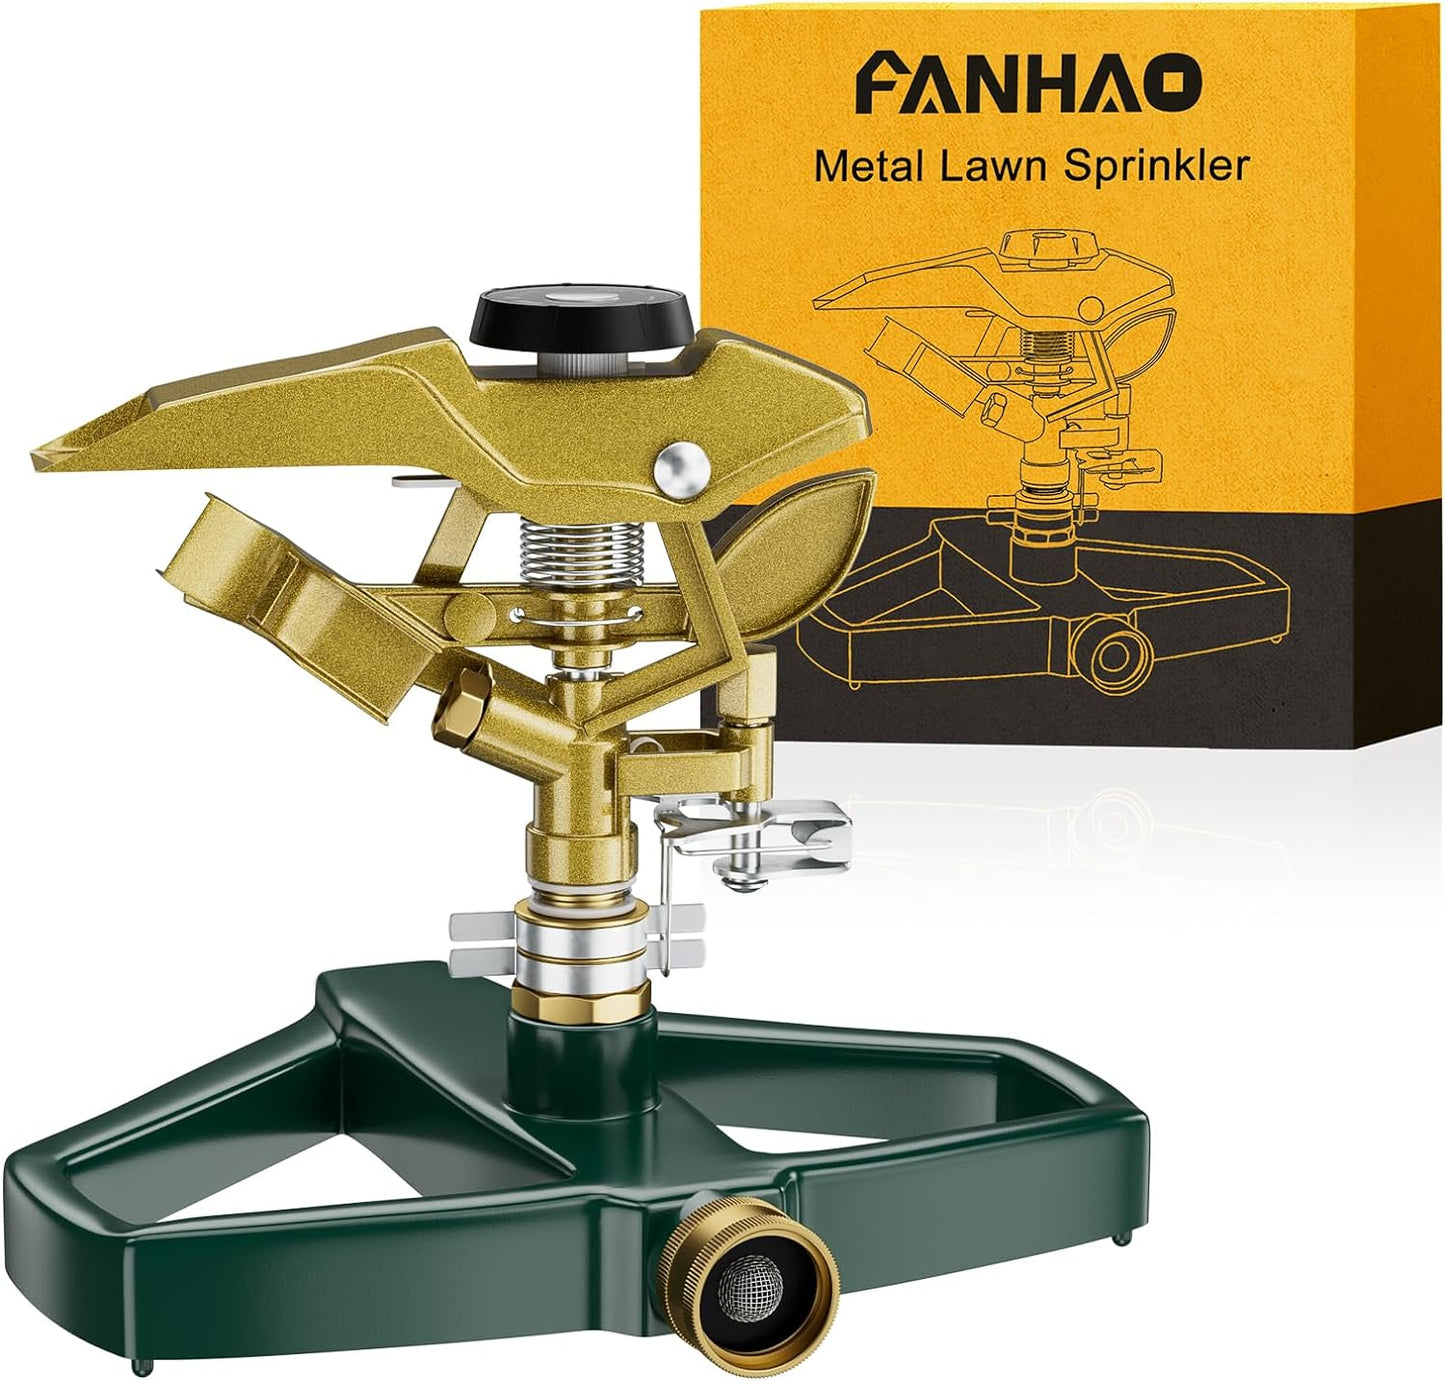 FANHAO Heavy Duty Pulsating Impact Lawn Sprinkler with Metal Base